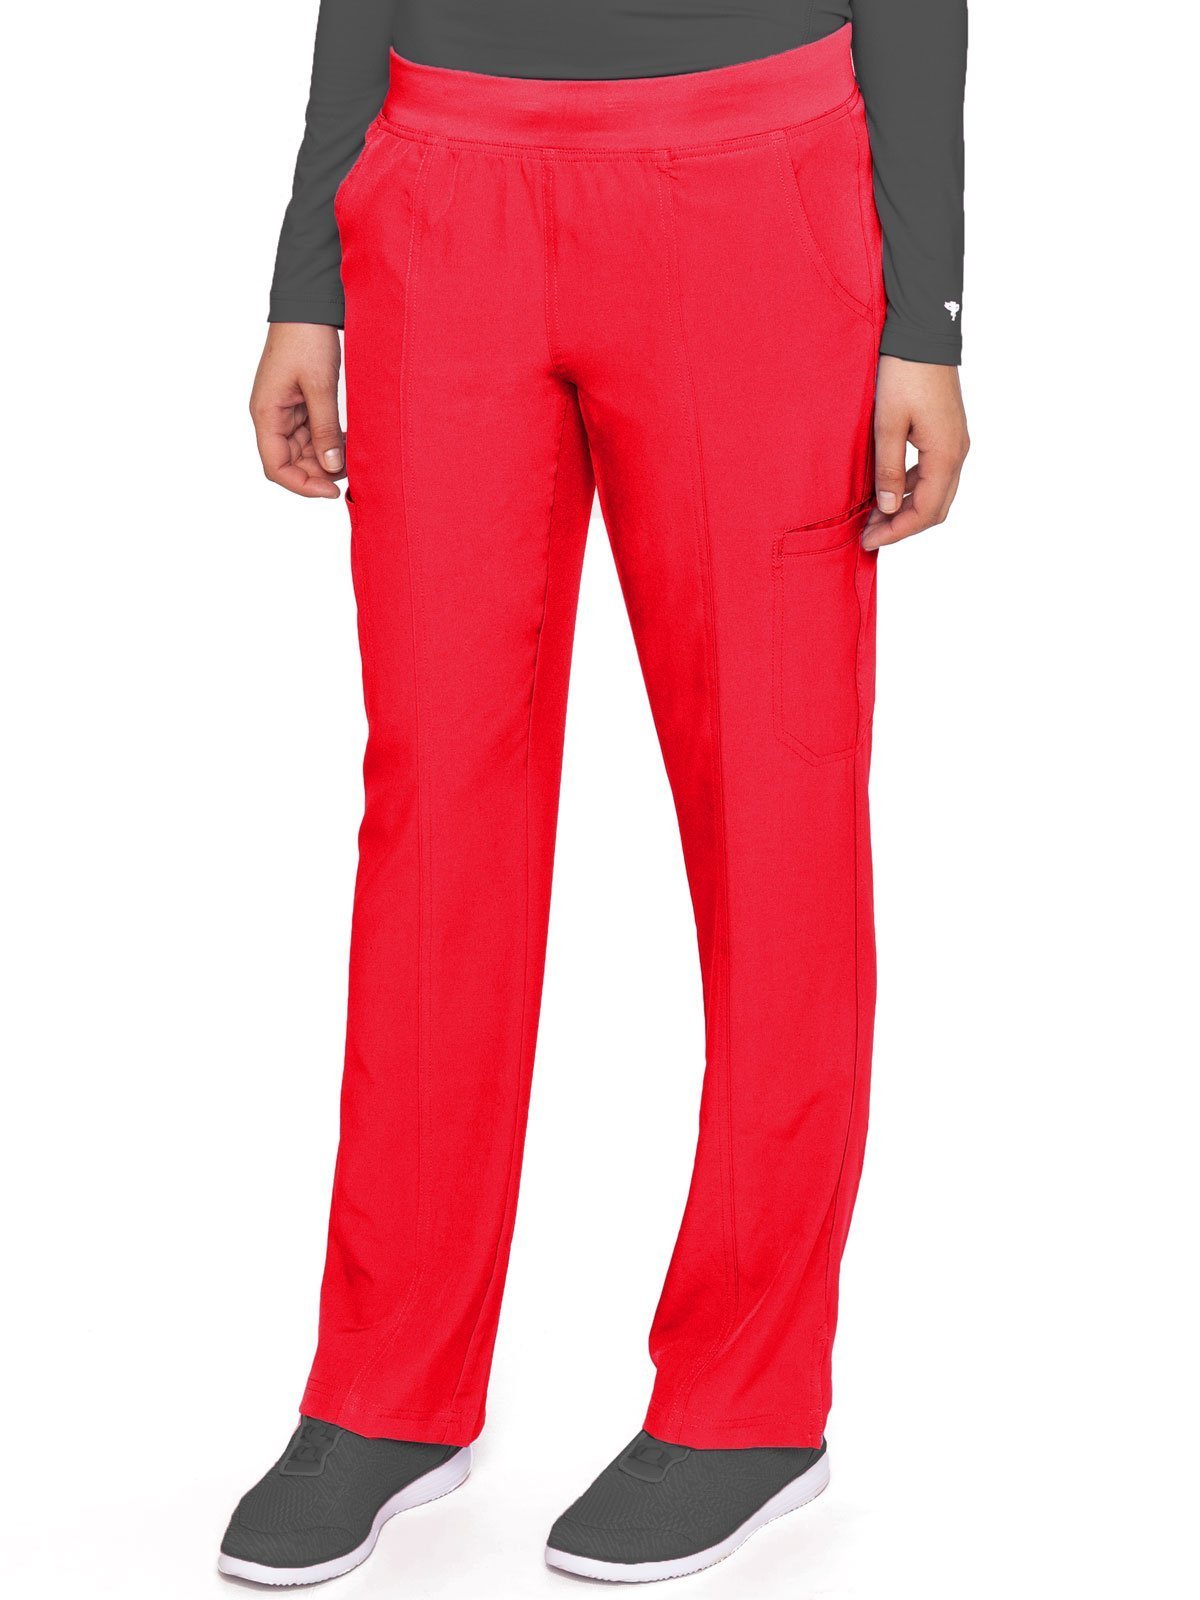 Med Couture 8744 YOGA 2 CARGO POCKET PANT (SIZE:XS-5X)